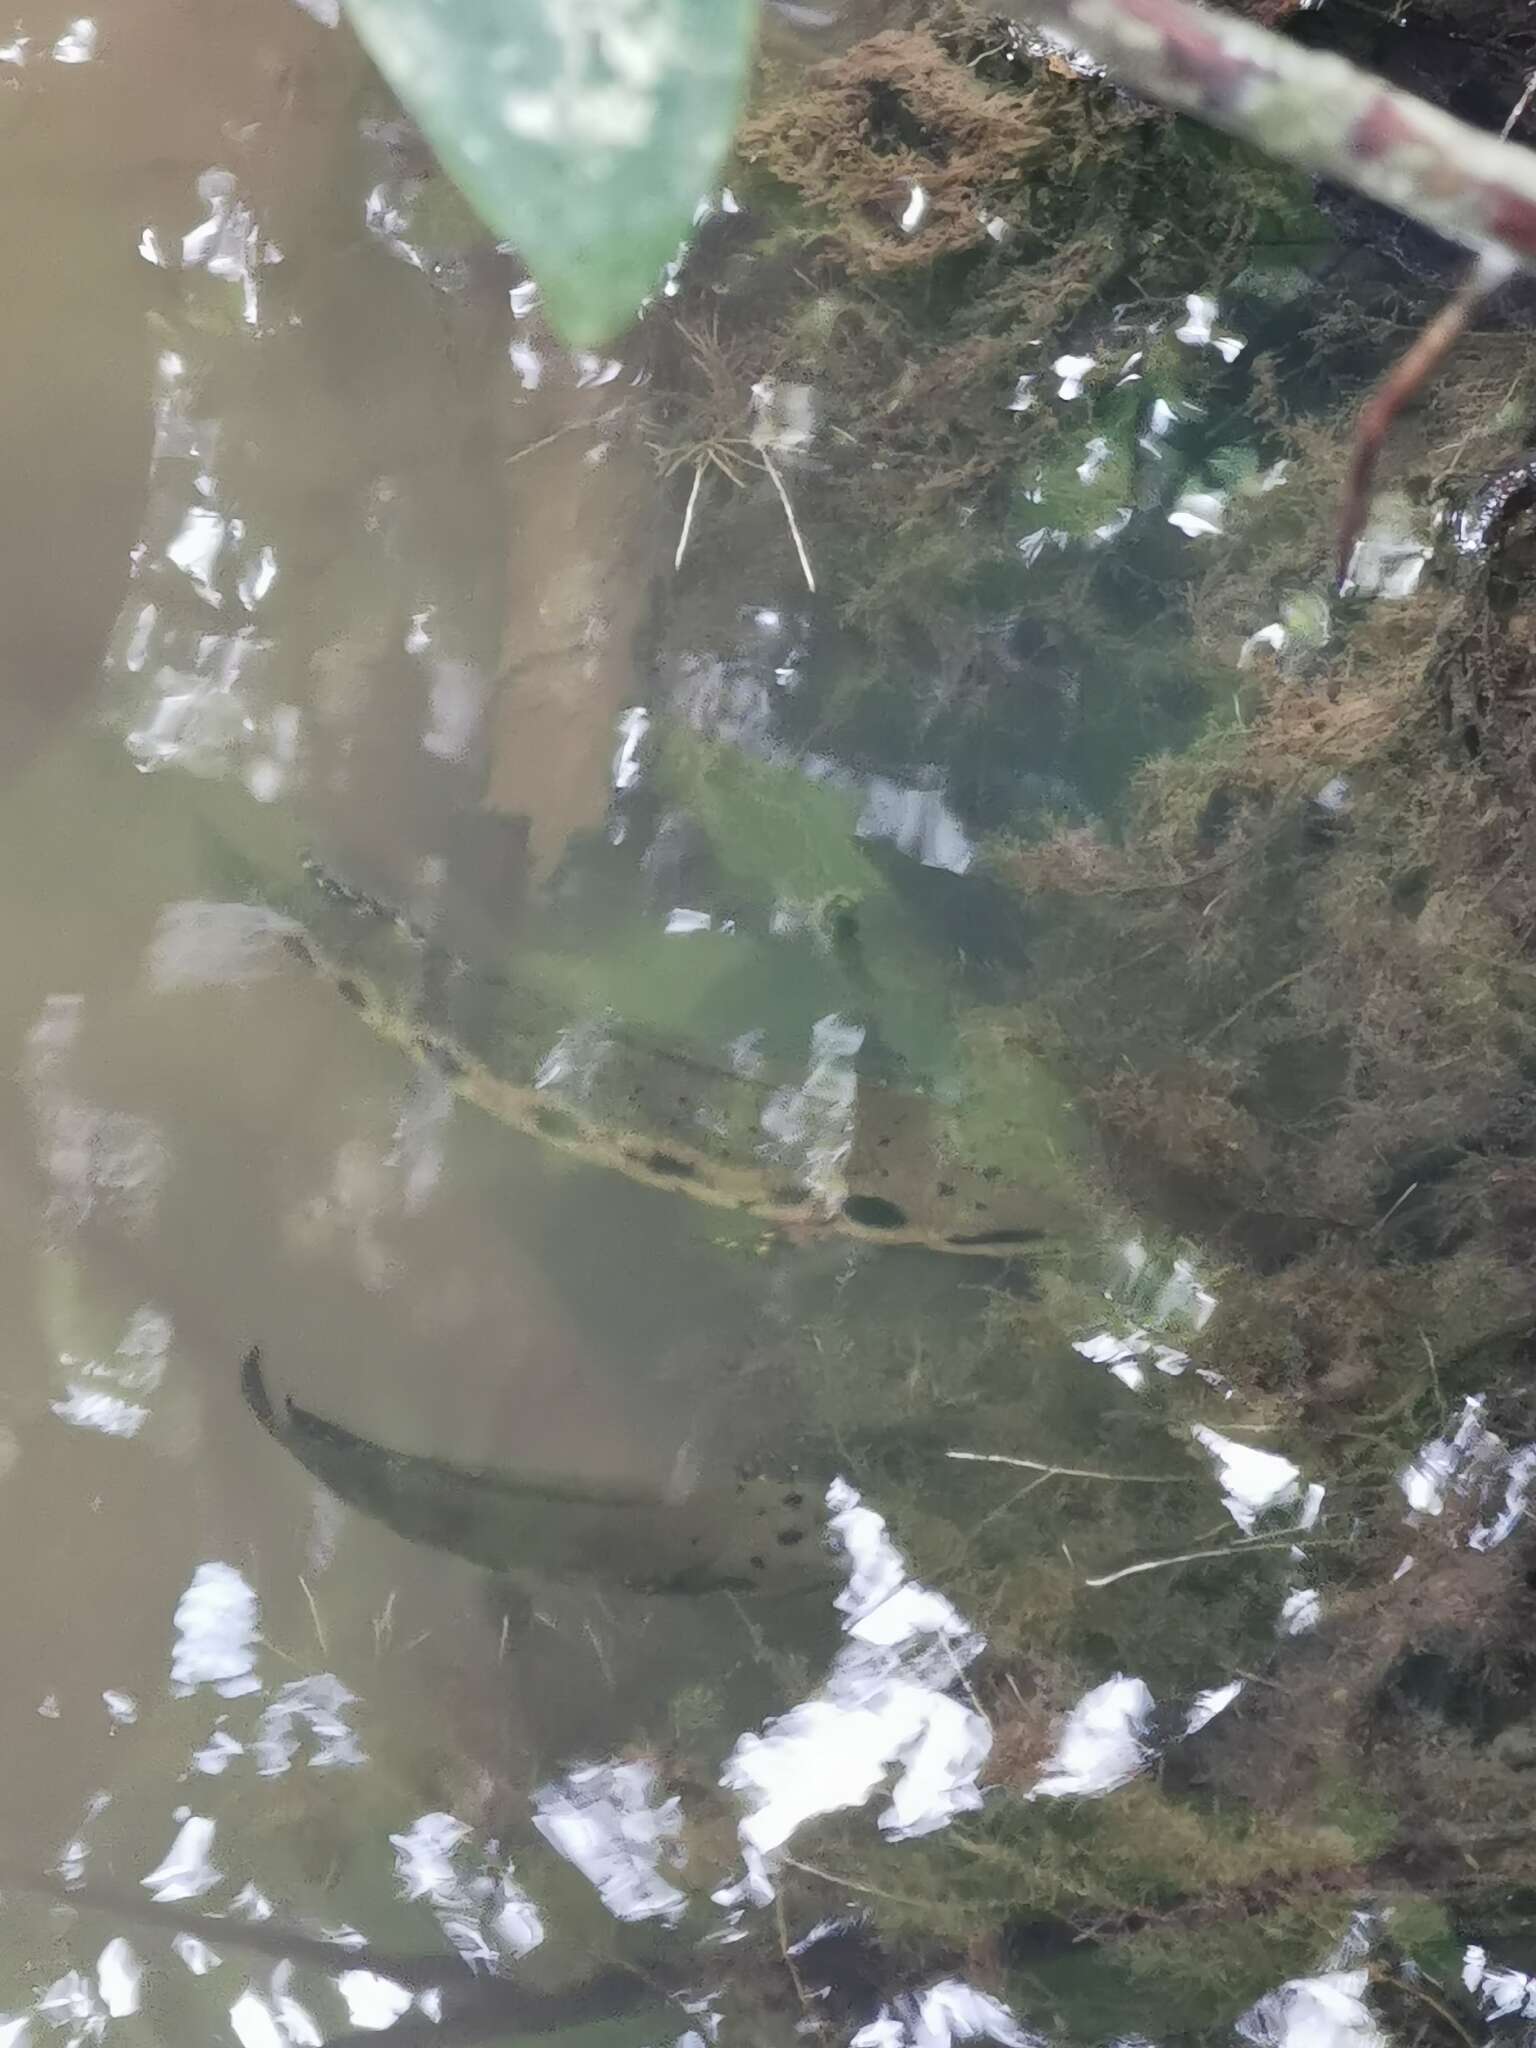 Image of Forest Snakehead